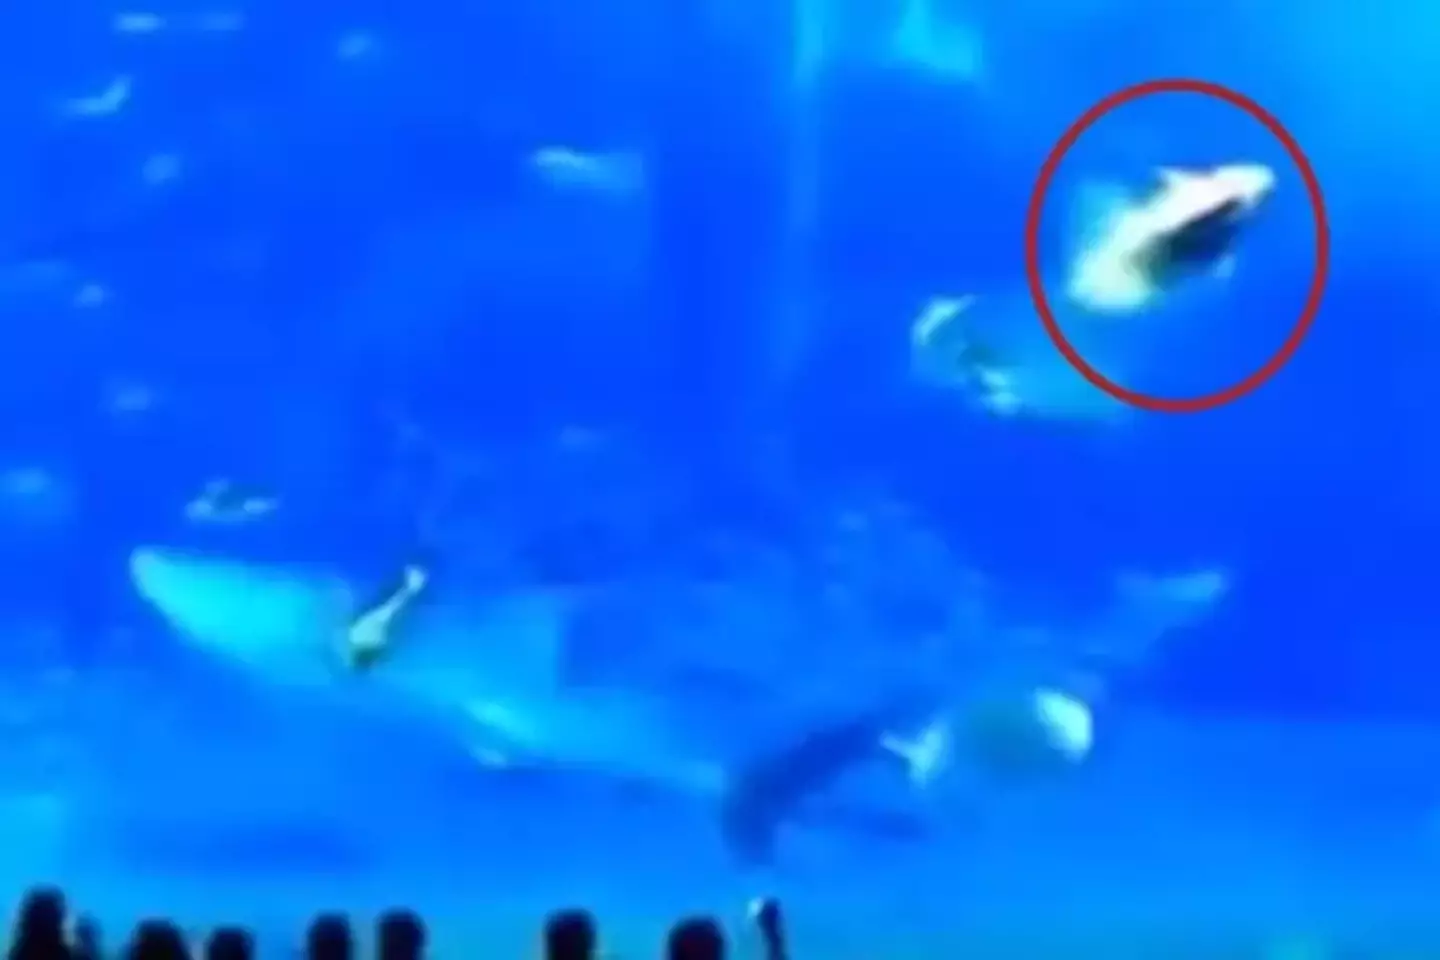 An unsettling video of a fish 'killing itself' after being startled by camera flash has resurfaced on social media.